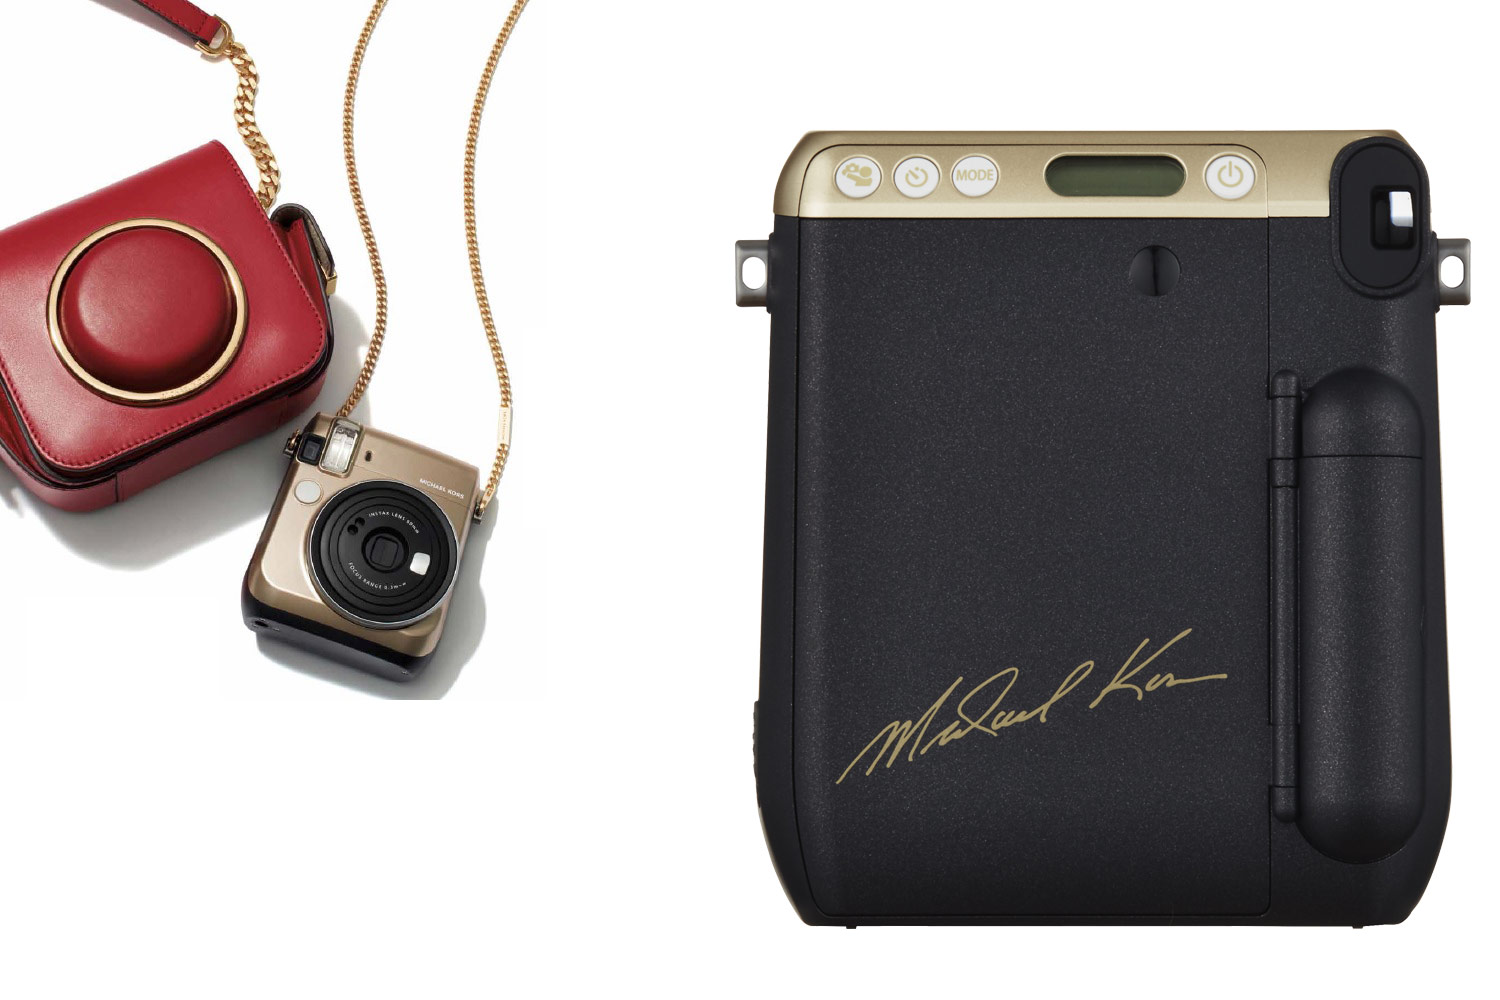 Fujifilm and Michael Kors Collaborate on Gold Instax Camera | Digital Trends